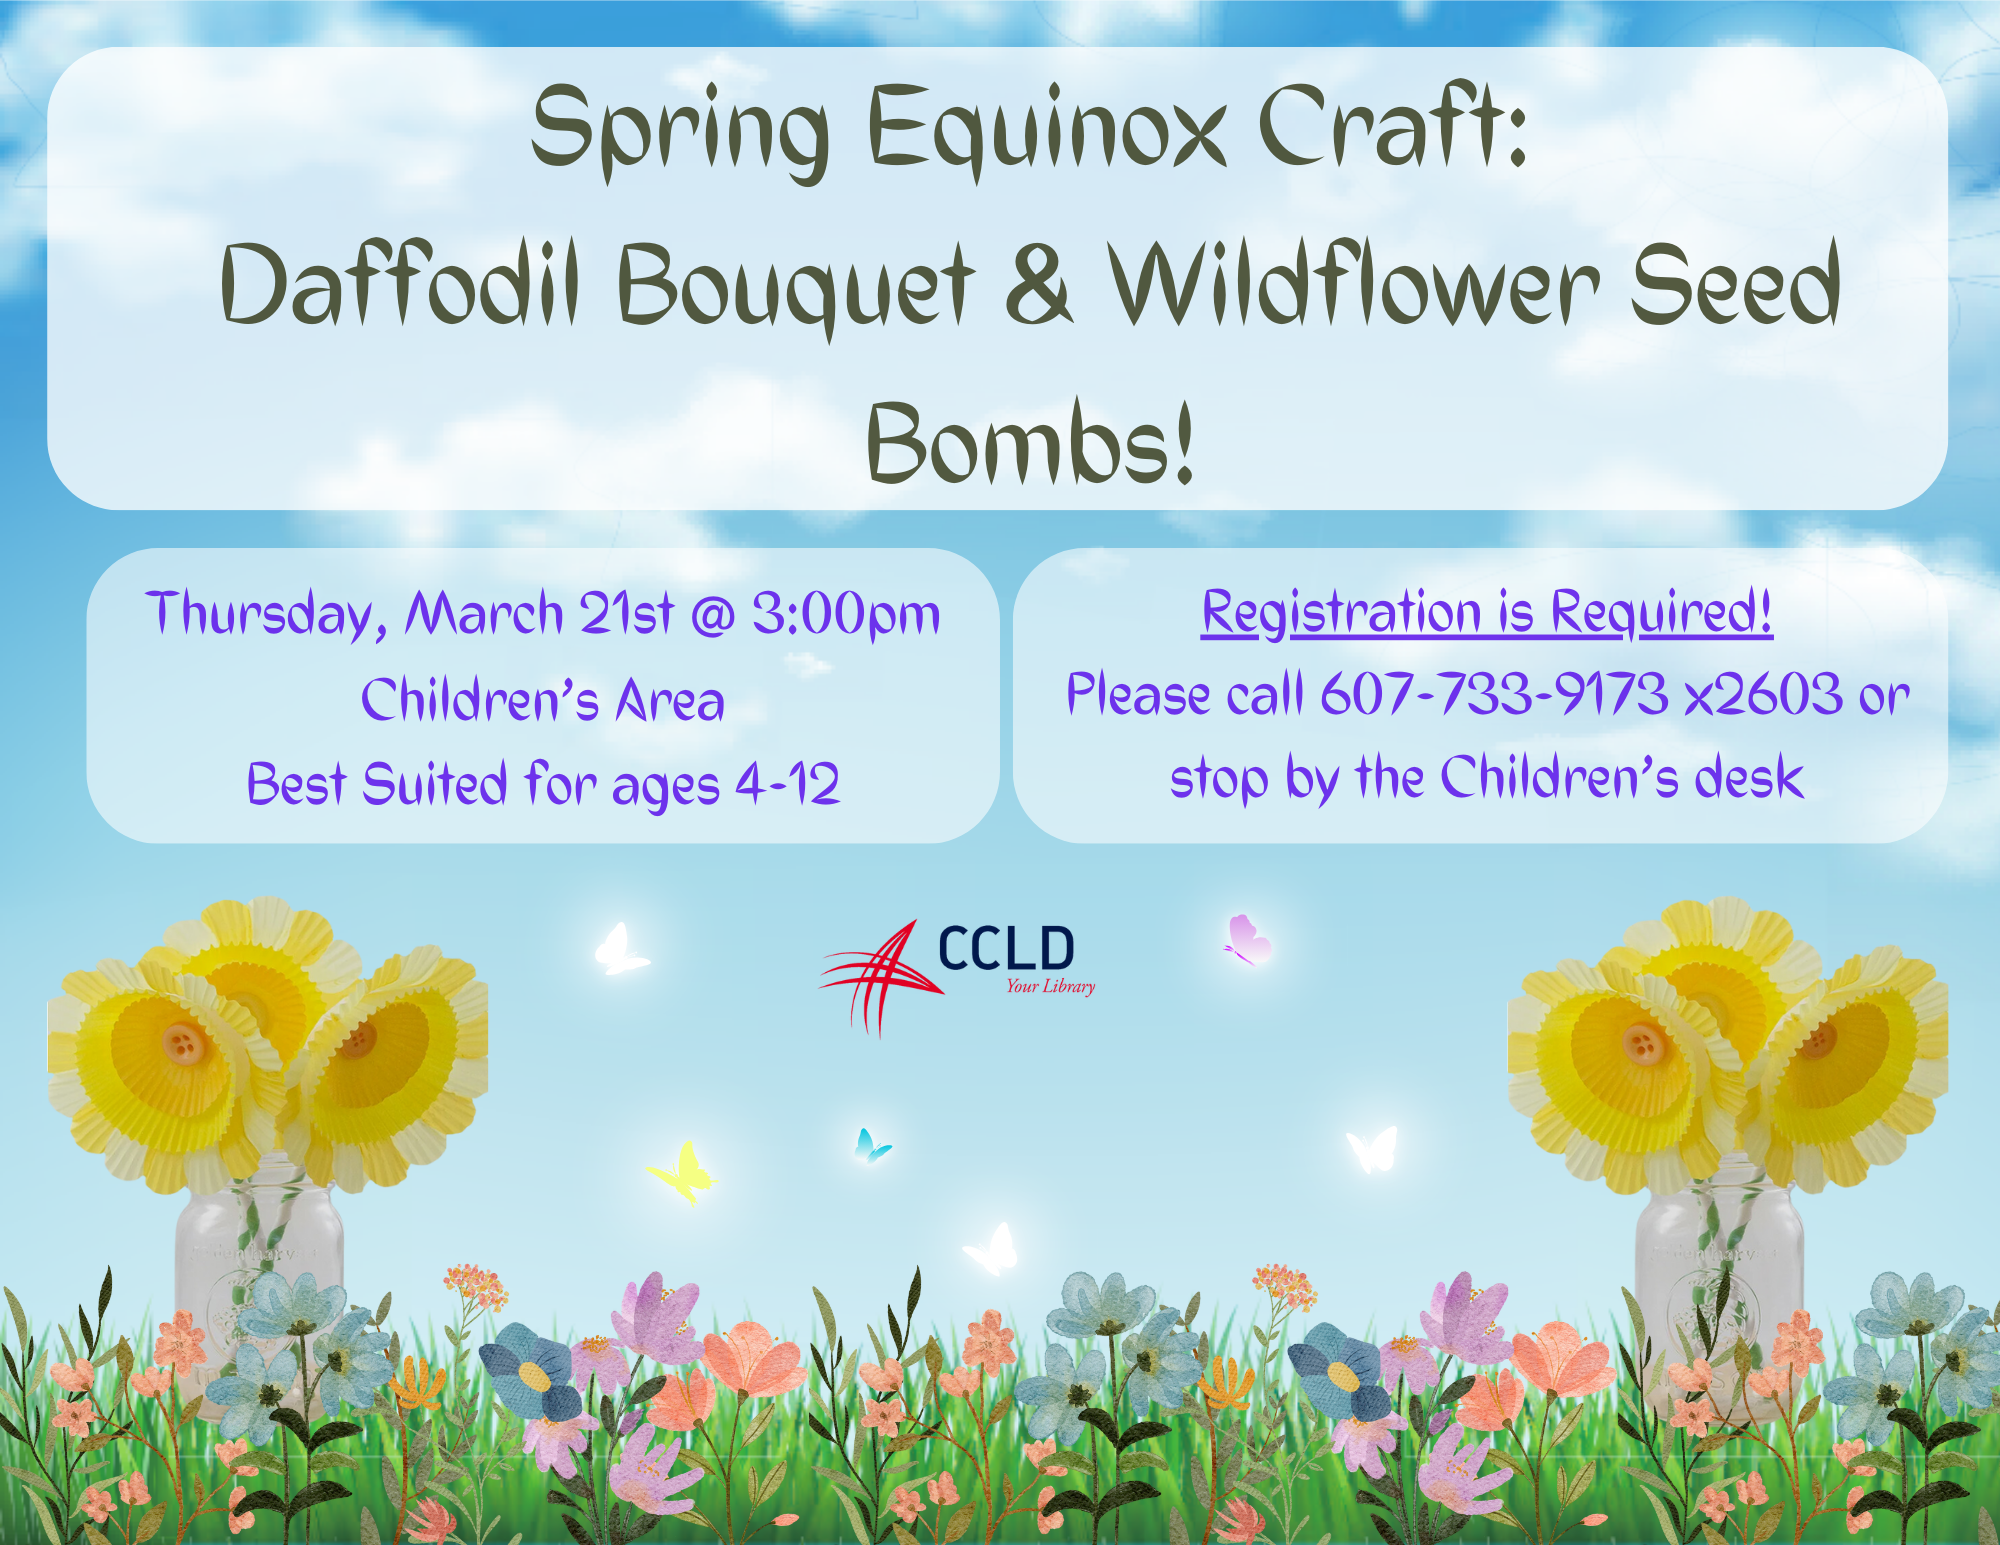 Happy Spring Equinox! The daffodils are blooming at Steele Memorial Library, and you can make a bouquet of your own to take home! Plus, make DIY native pollinator seed bombs to grow in your own garden. Join us on March 21st from 3-4:30.

Registration for this craft is required! To register, please call the Steele Children's Desk at 607-733-9173 x2306, or stop by the Children's Desk!